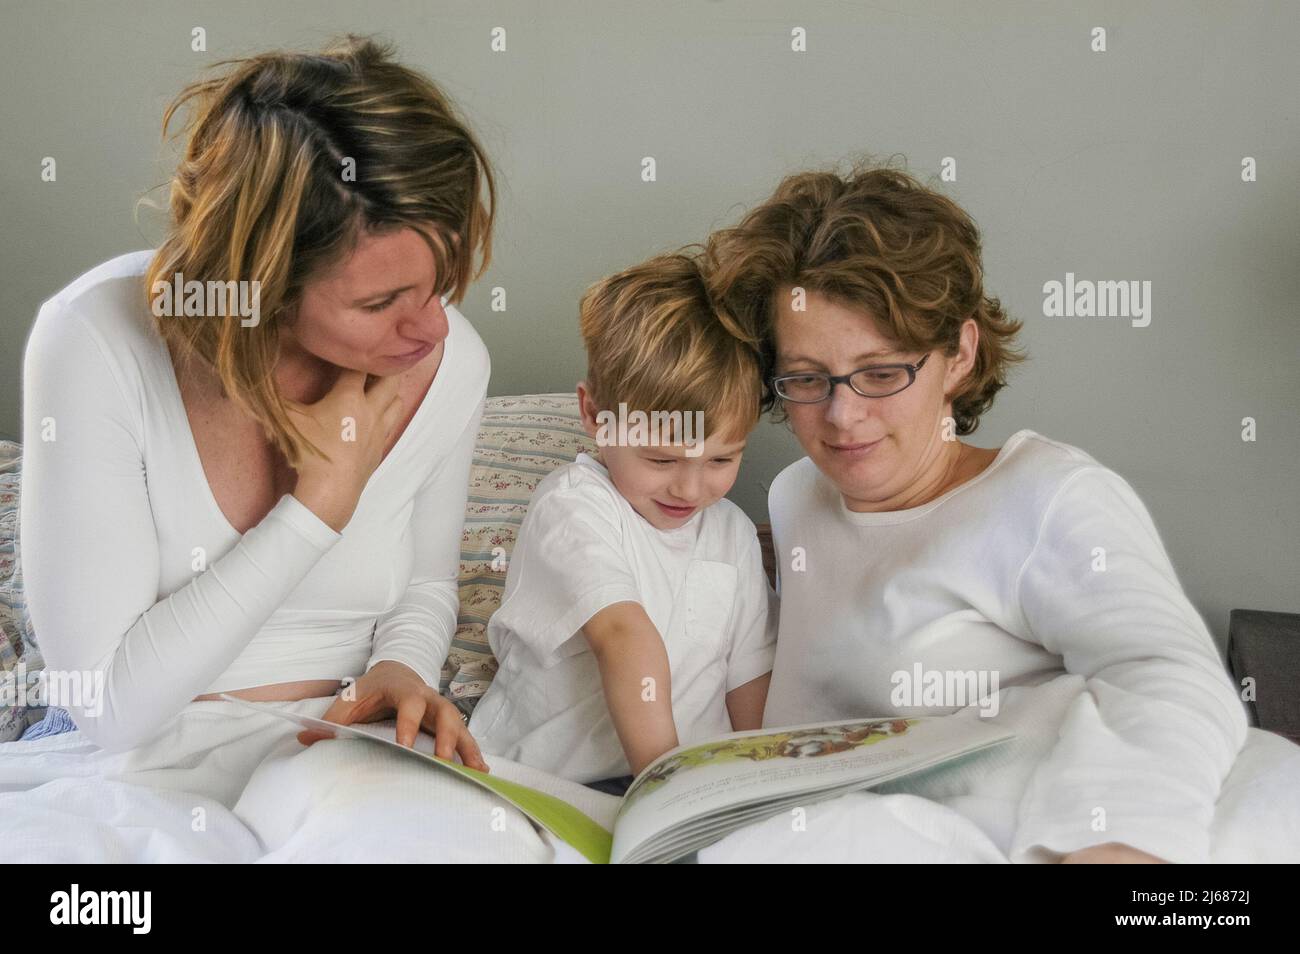 A family with two moms enjoys a morning bed together Stock Photo